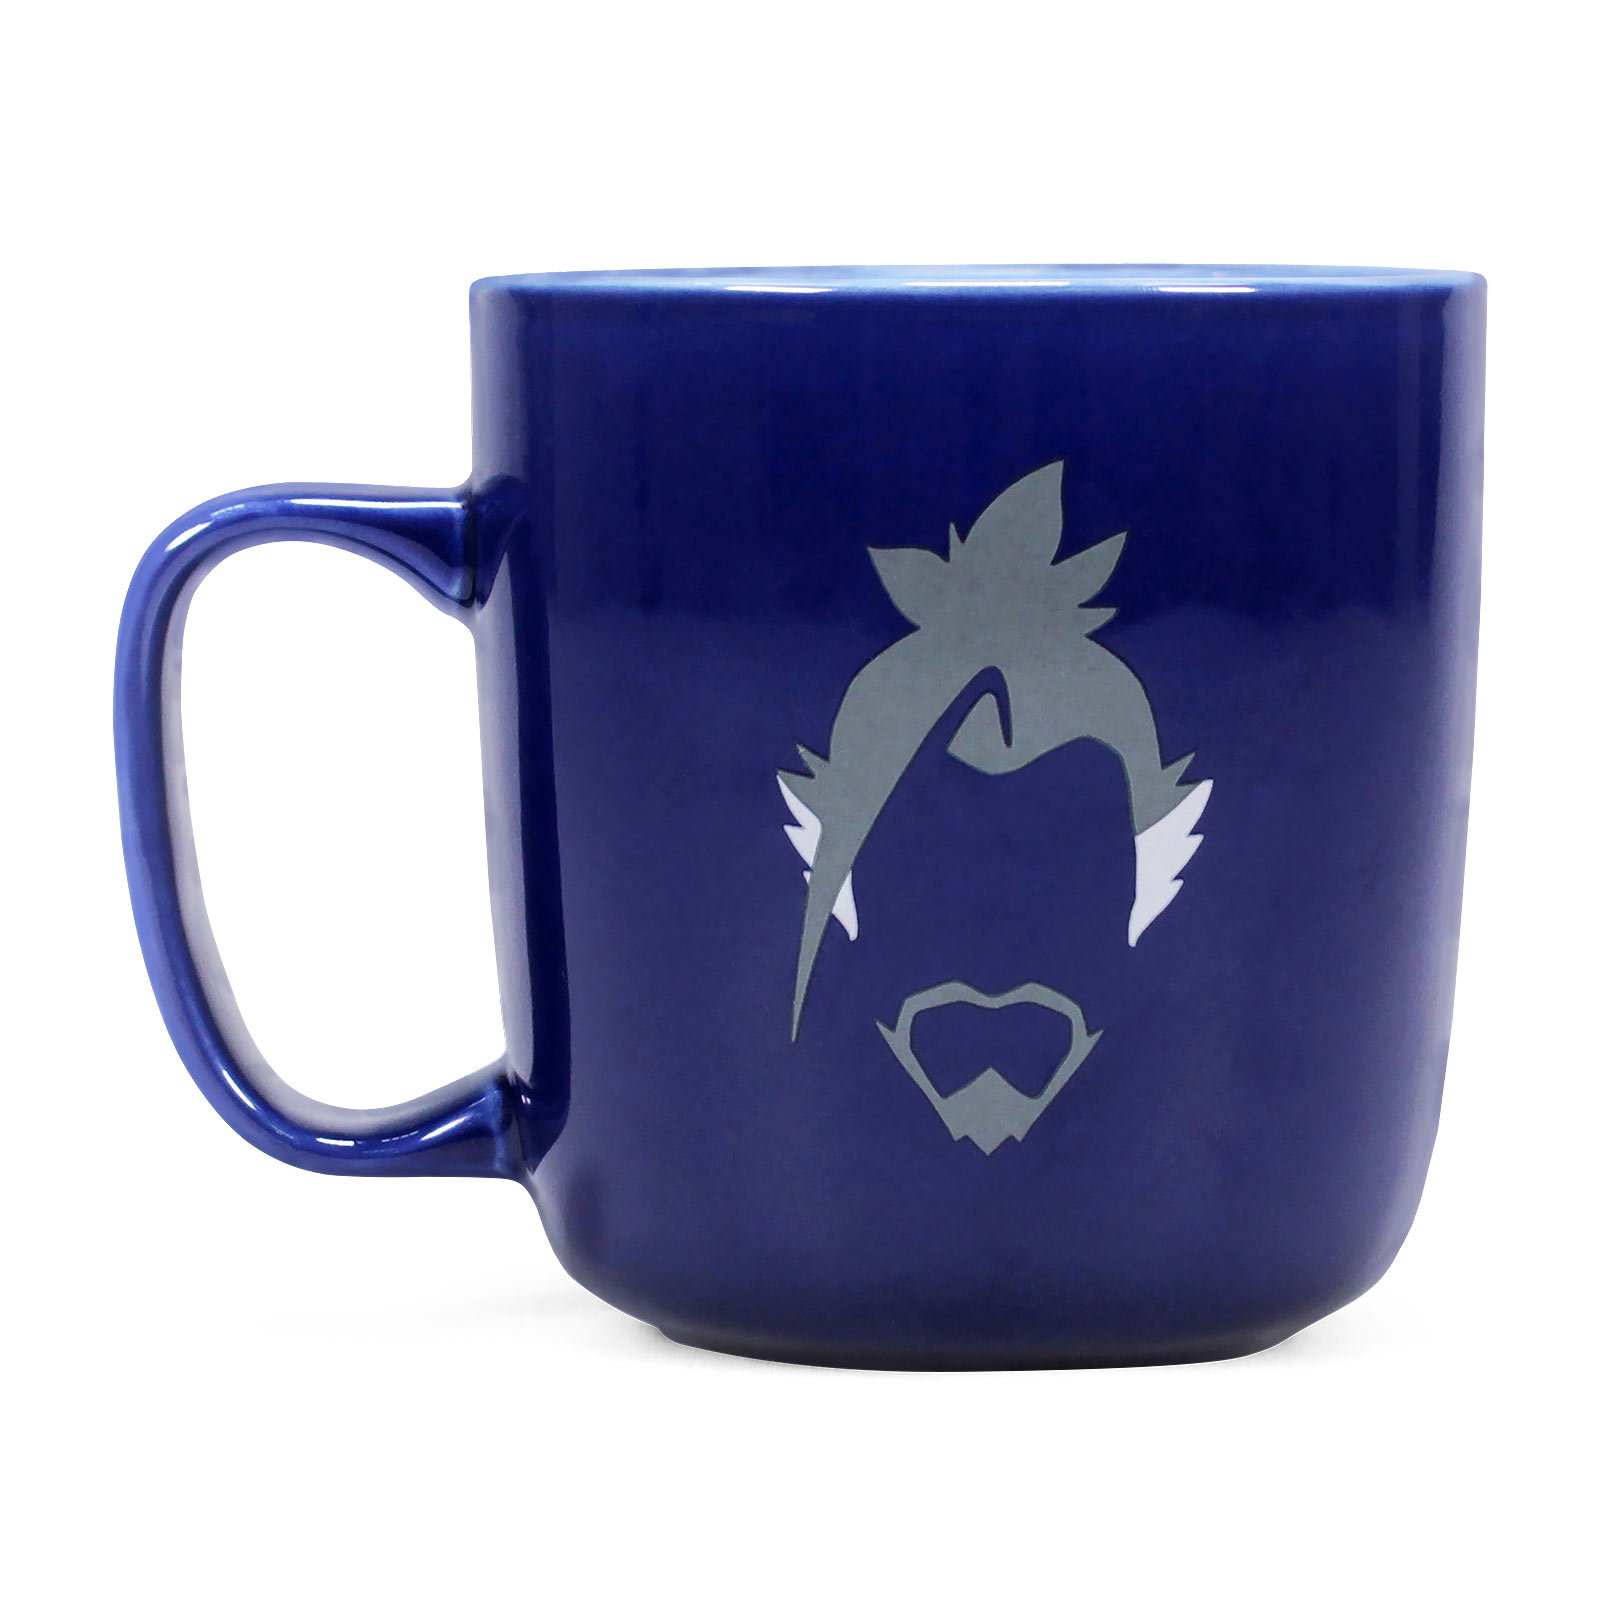 Overwatch - Hanzo Cup